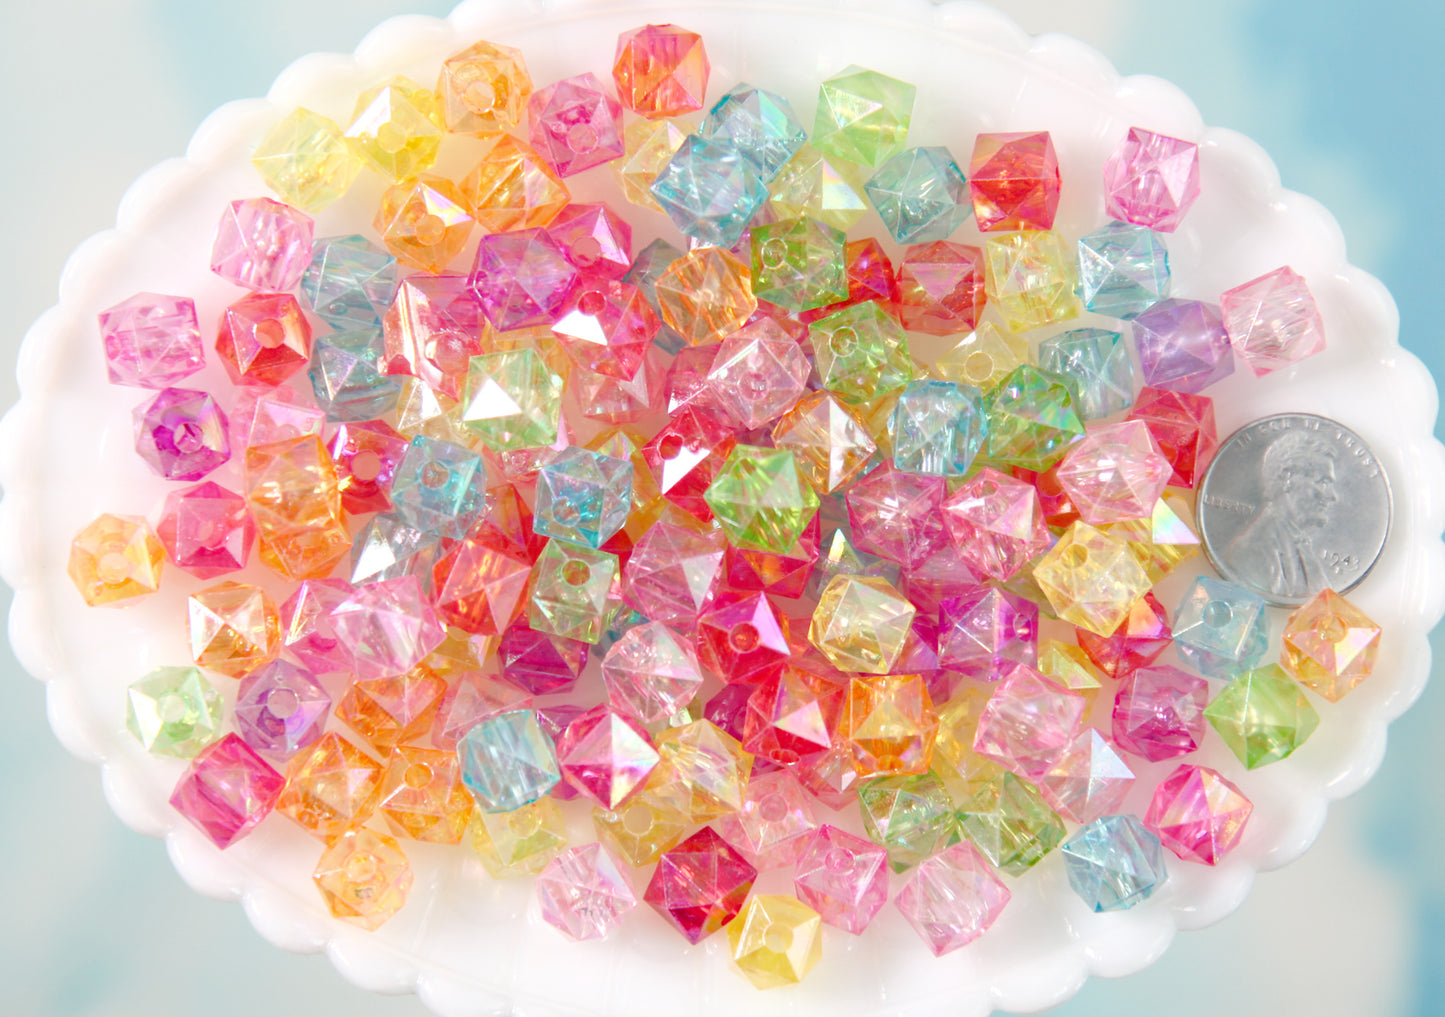 Cube Beads - 10mm AB Transparent Faceted Cube Acrylic Square Transparent Plastic Beads - 100 pc set